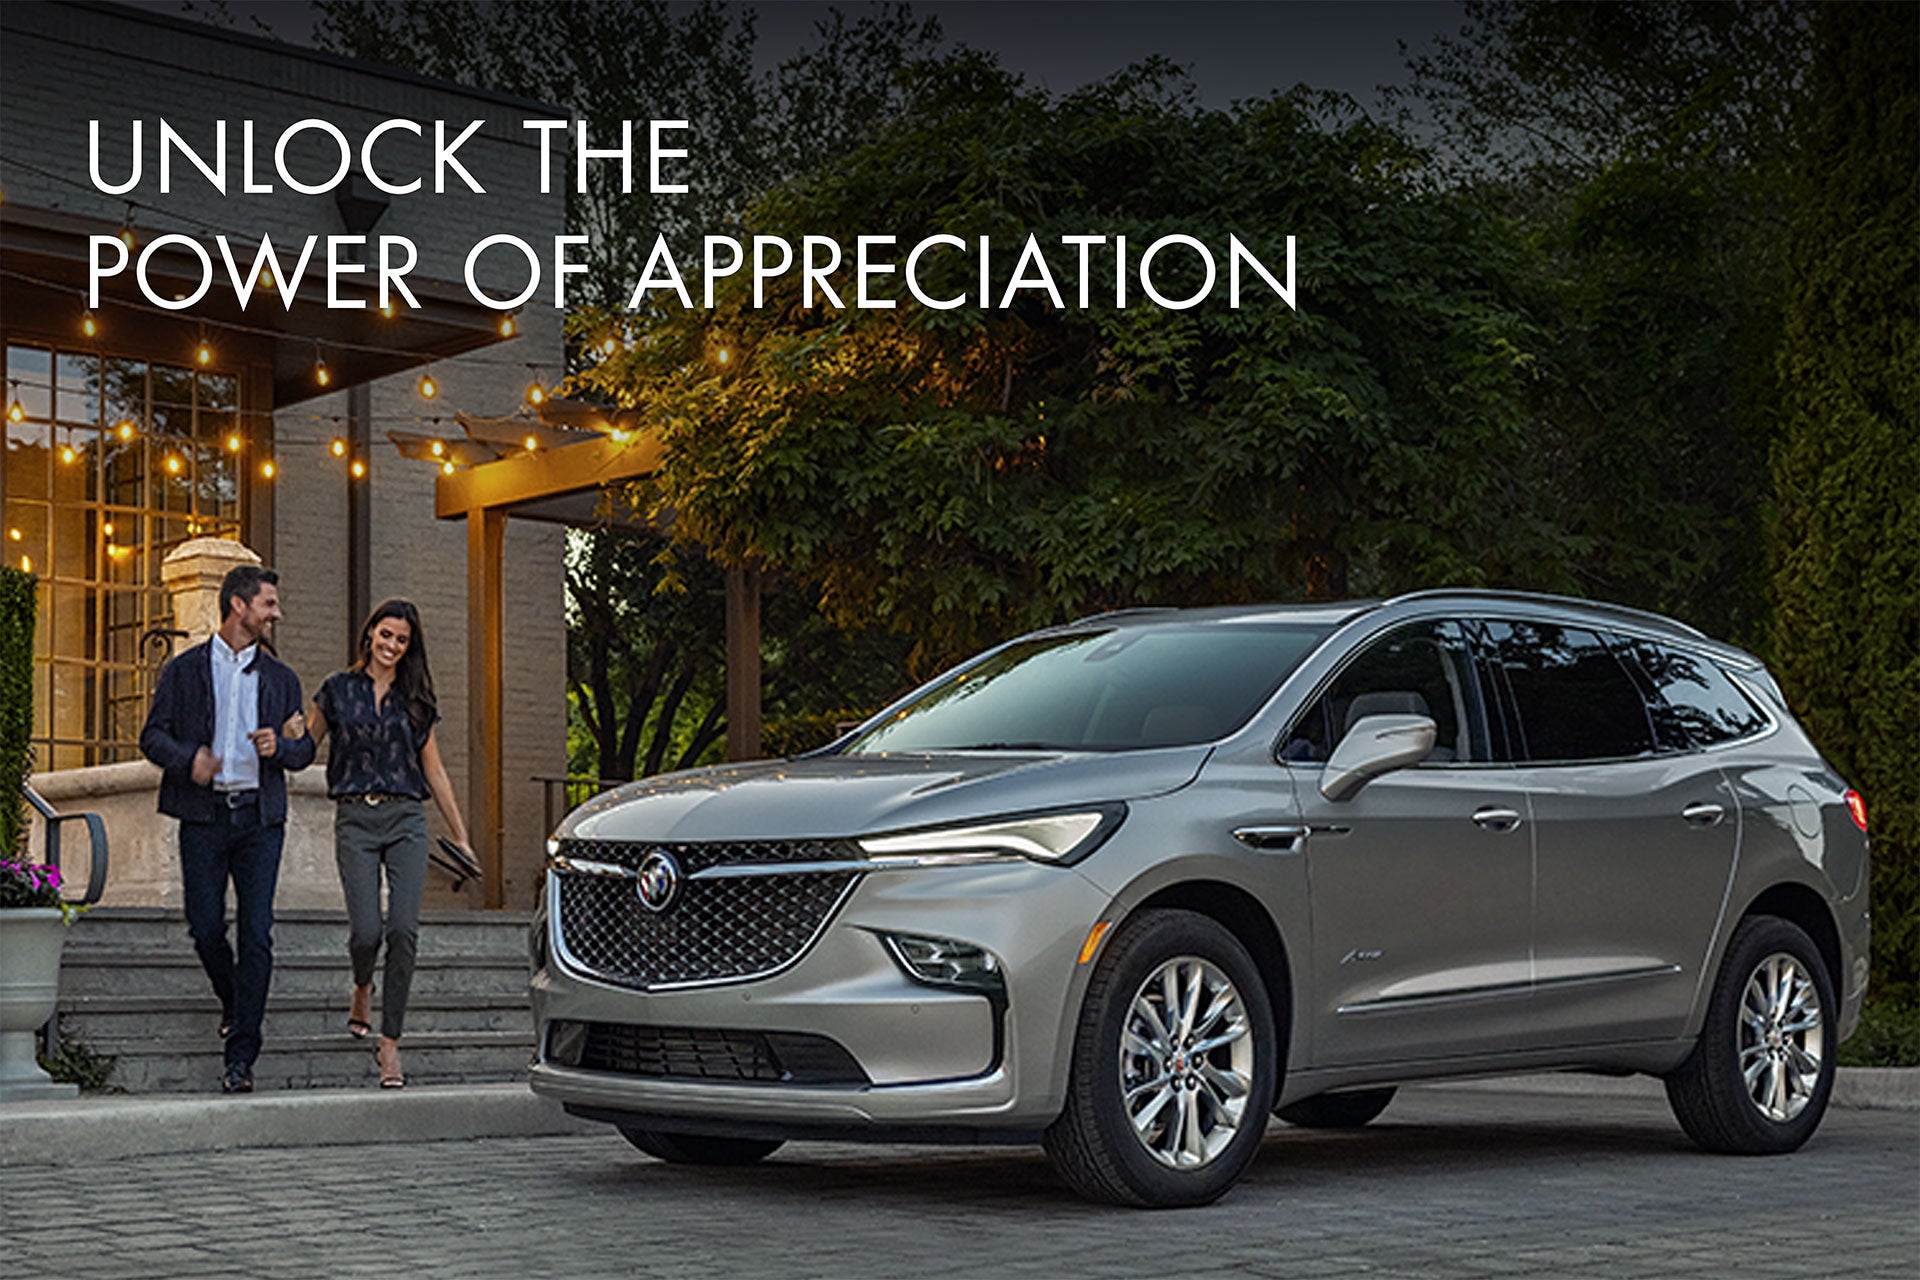 Unlock the power of appreciation | Turner Buick GMC in New Holland PA